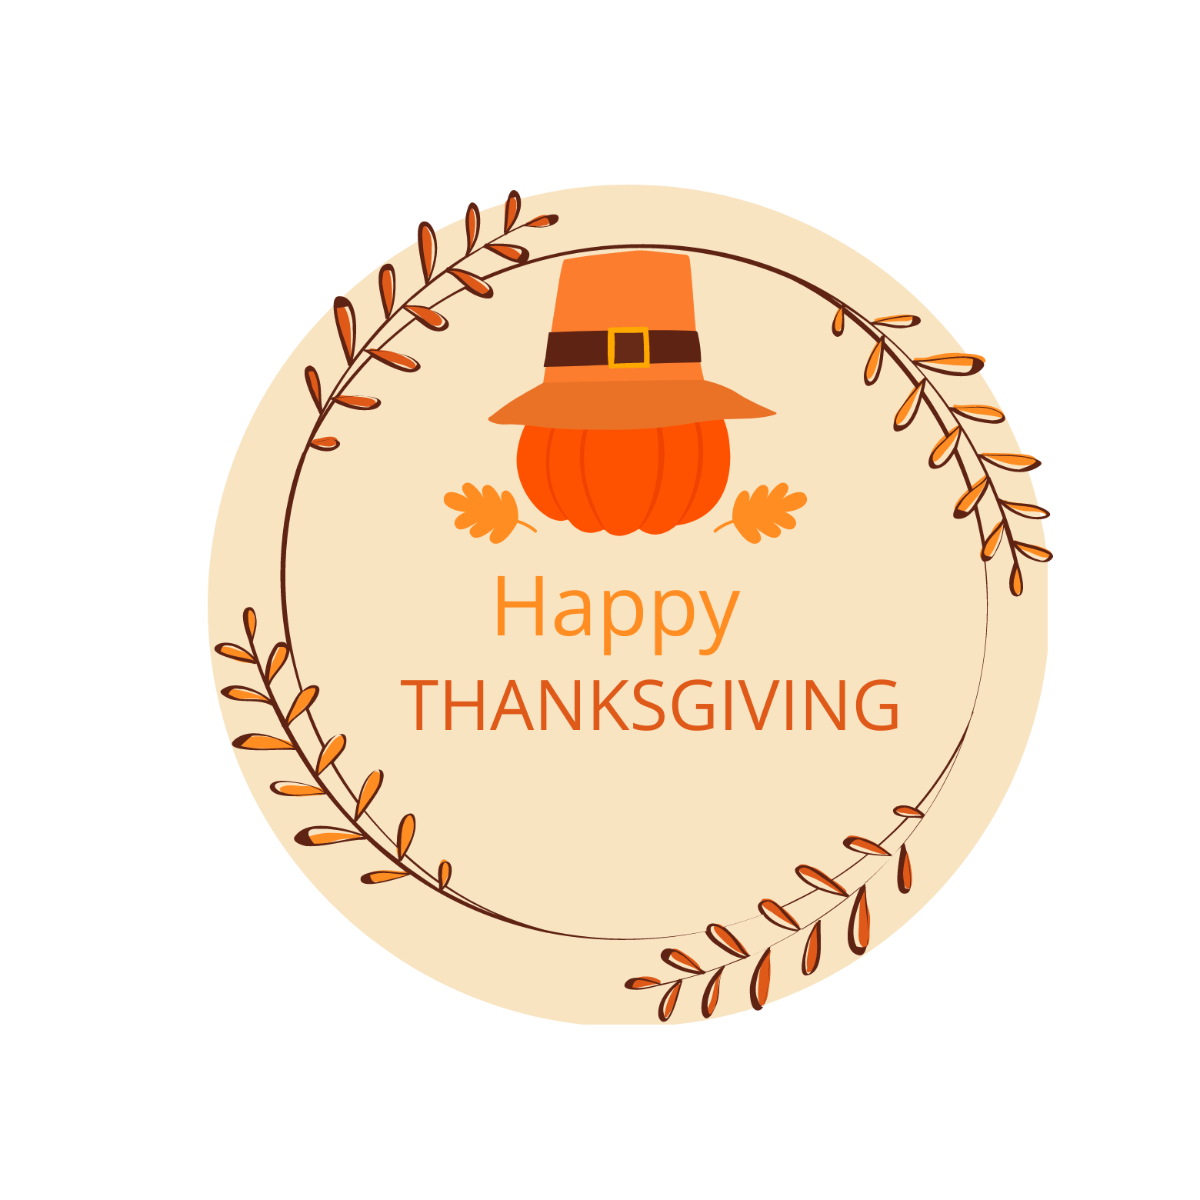 Happy Thanksgiving Circle Vector Template